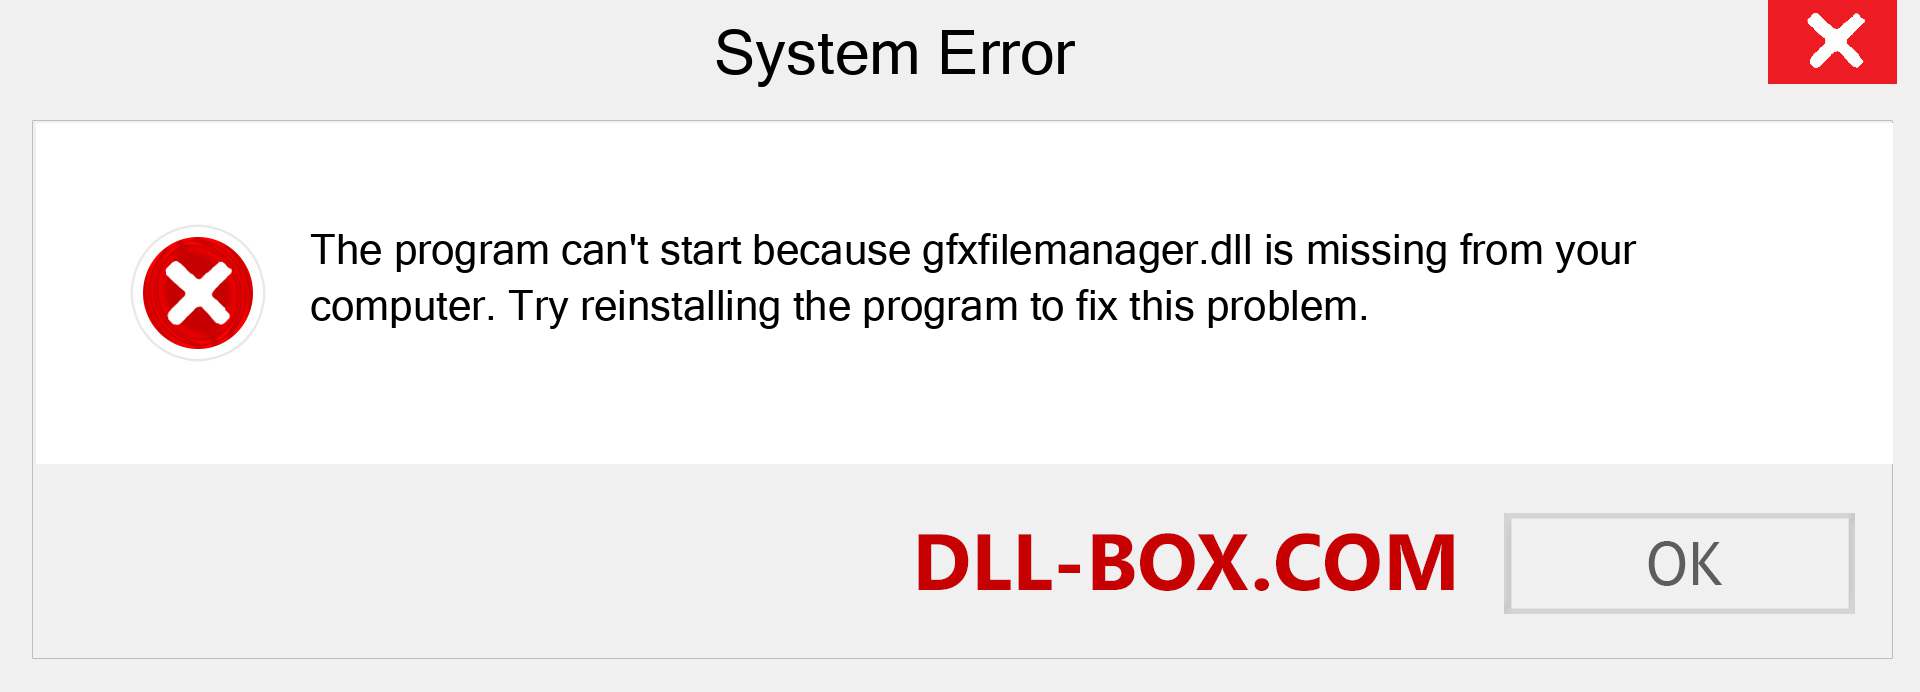  gfxfilemanager.dll file is missing?. Download for Windows 7, 8, 10 - Fix  gfxfilemanager dll Missing Error on Windows, photos, images